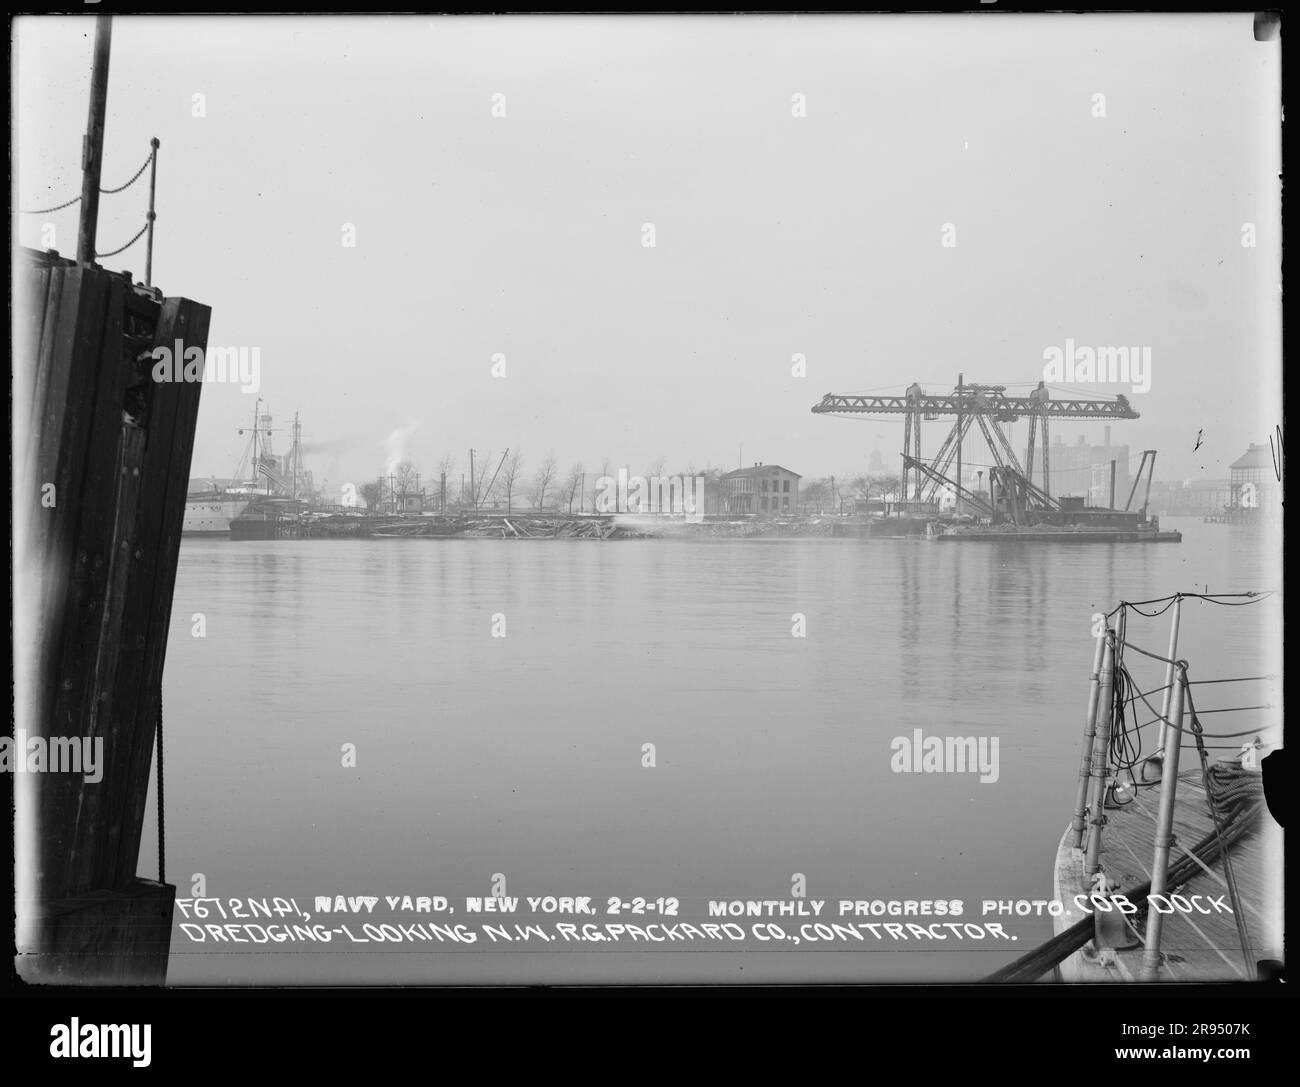 Monthly Progress Photo, Cob Dock Dredging, Looking Northwest, R. G. Packard Company, Contractor. Glass Plate Negatives of the Construction and Repair of Buildings, Facilities, and Vessels at the New York Navy Yard. Stock Photo